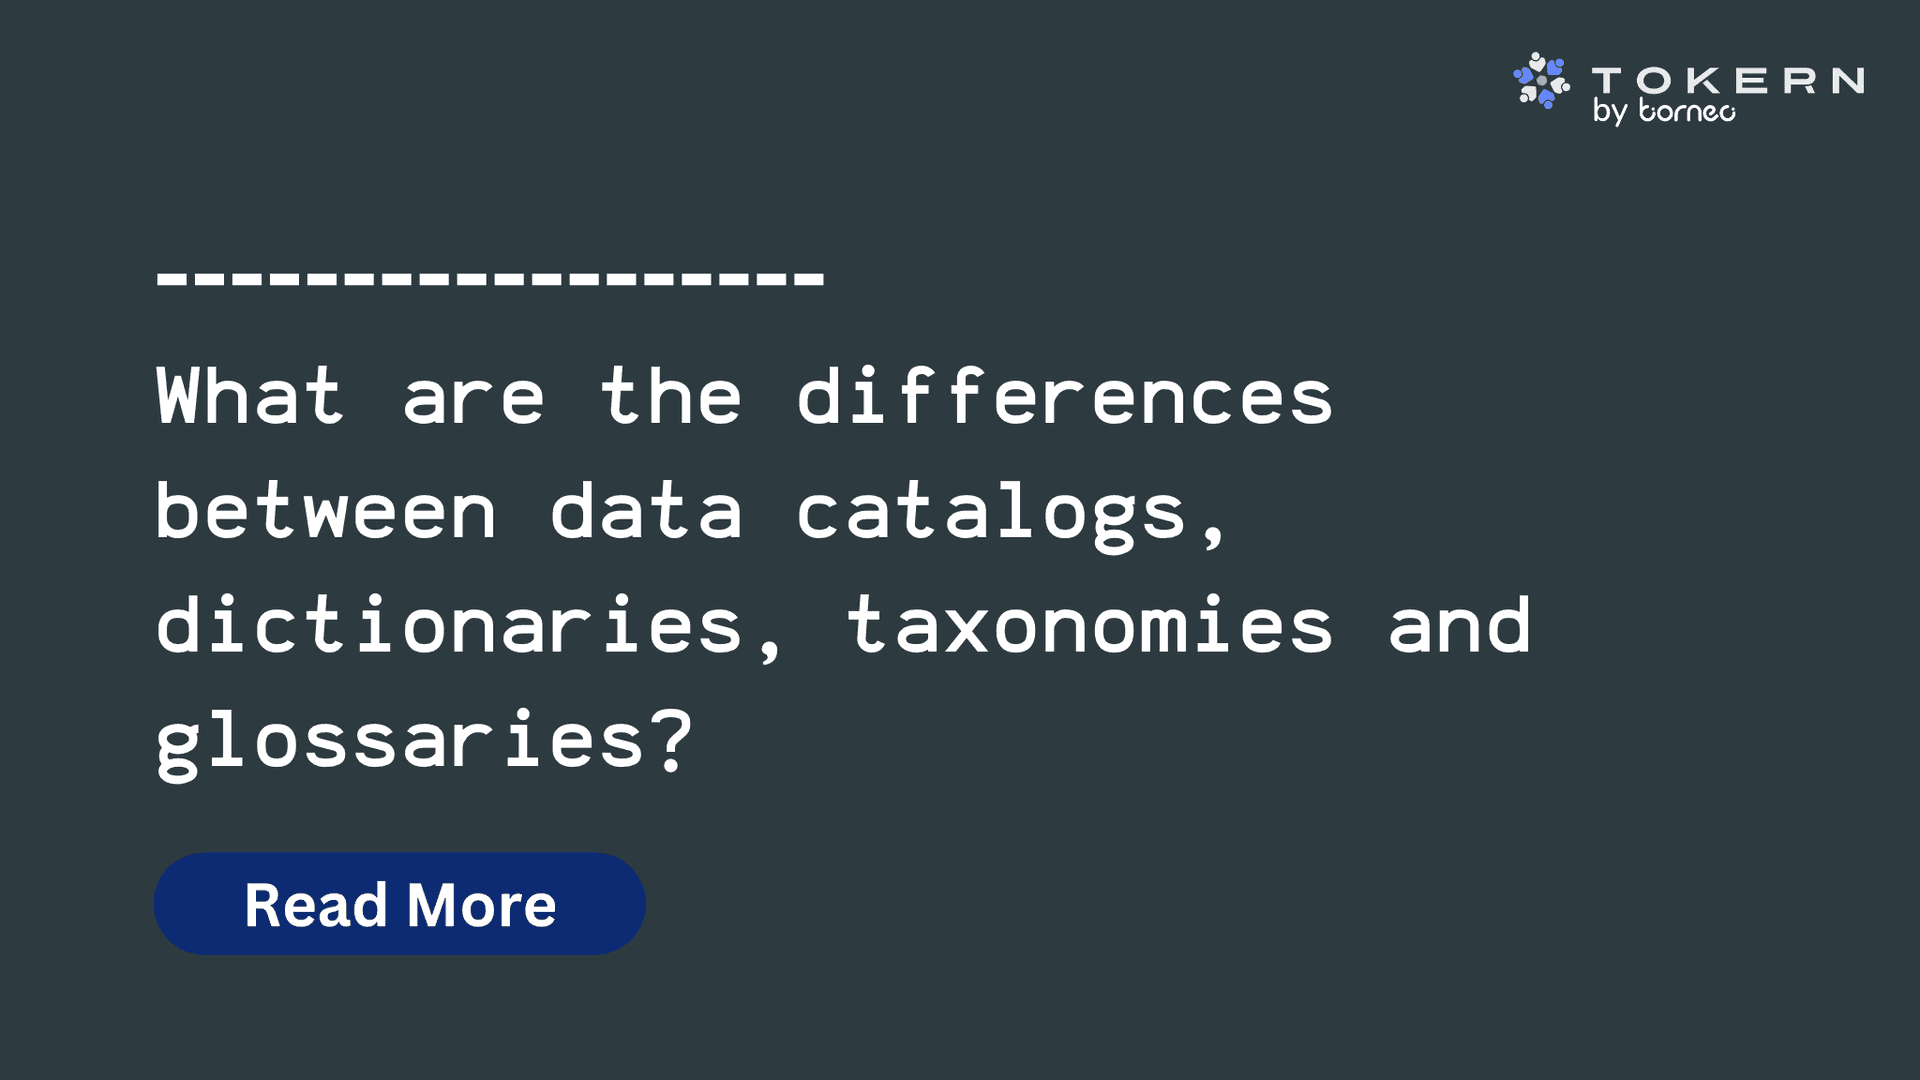 What_are_the_differences_between_data_catalogs_dictionaries_taxonomies_and_glossaries_fd0391c4a0.png